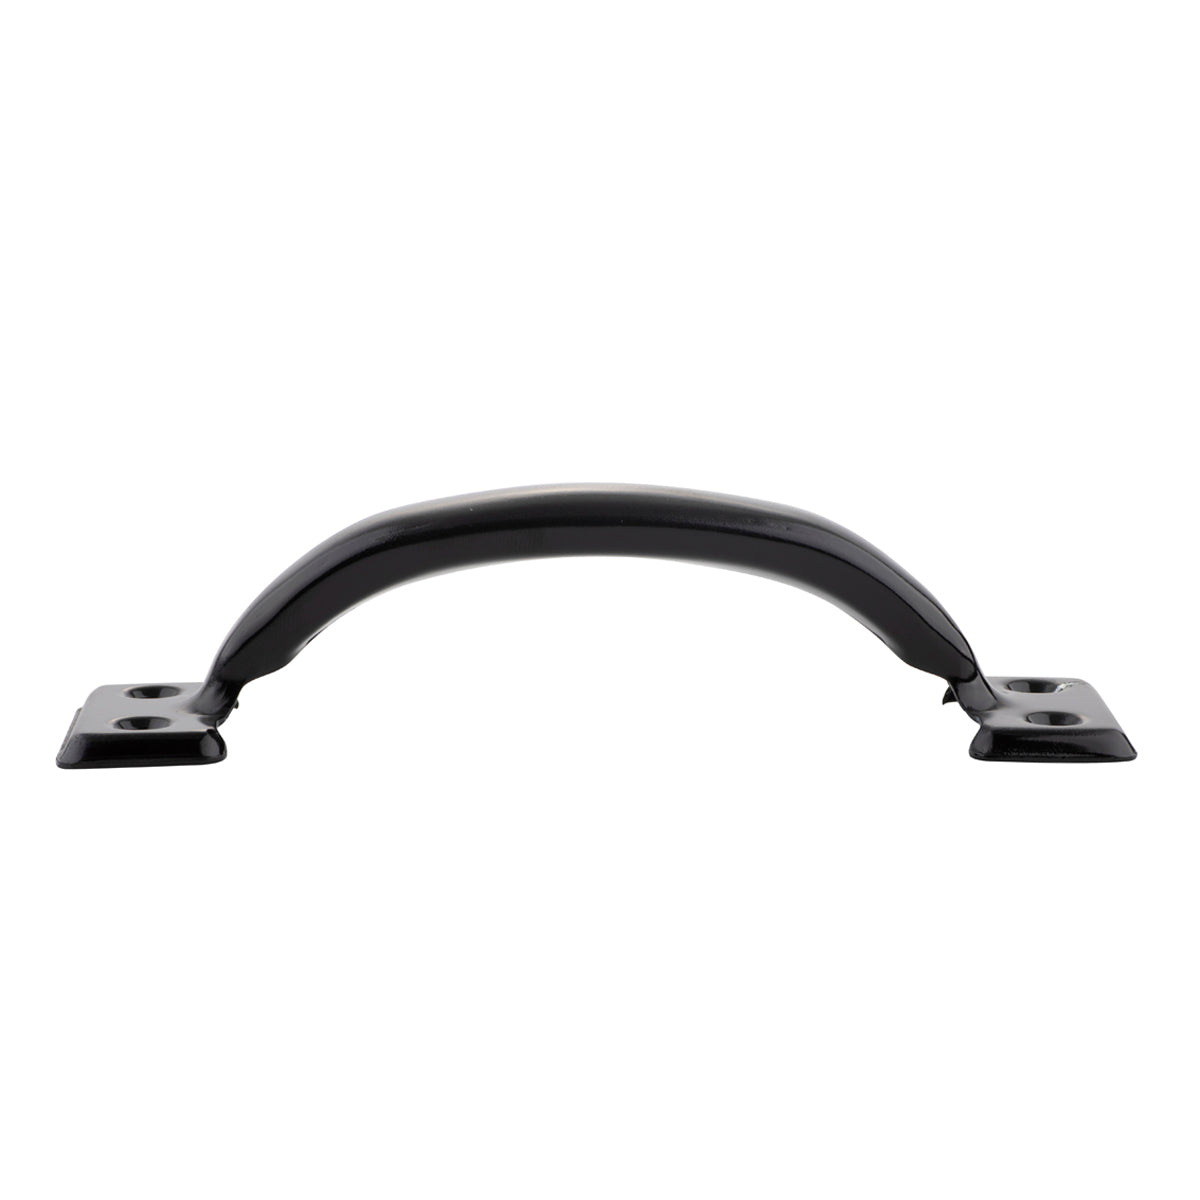 South Main Hardware Cabinet Handle, 6.5